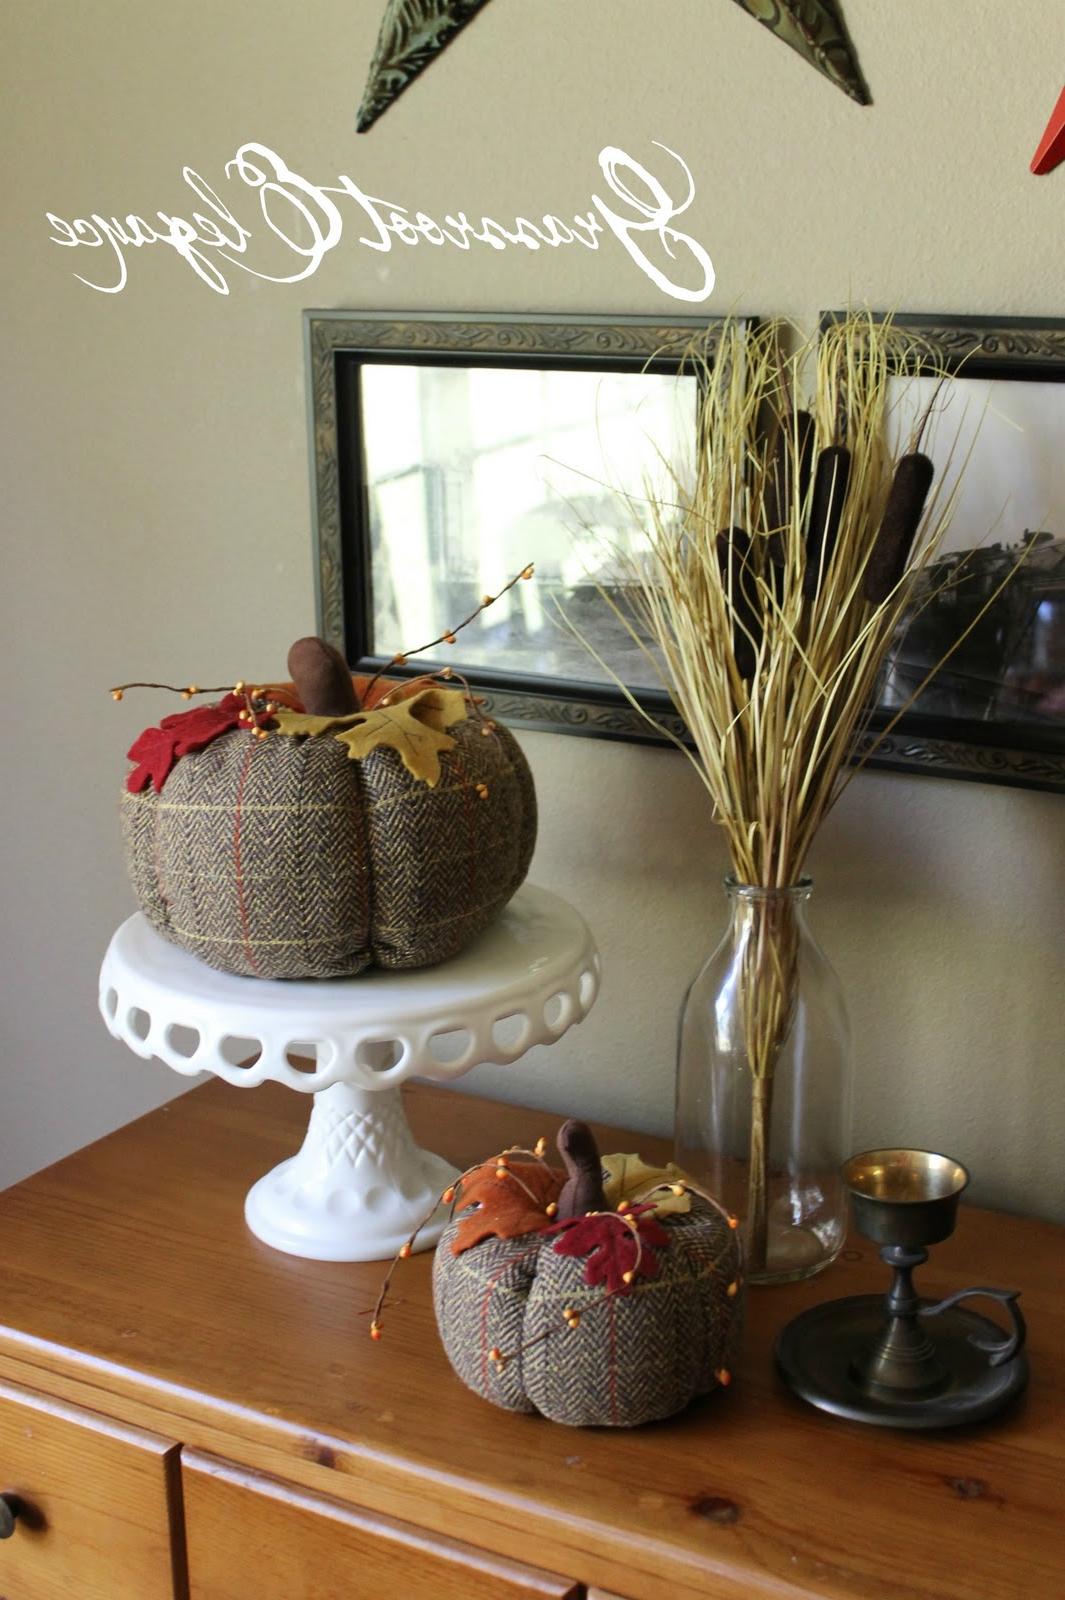 Mayflower shaped centerpiece ideas went Stores products andfall winter